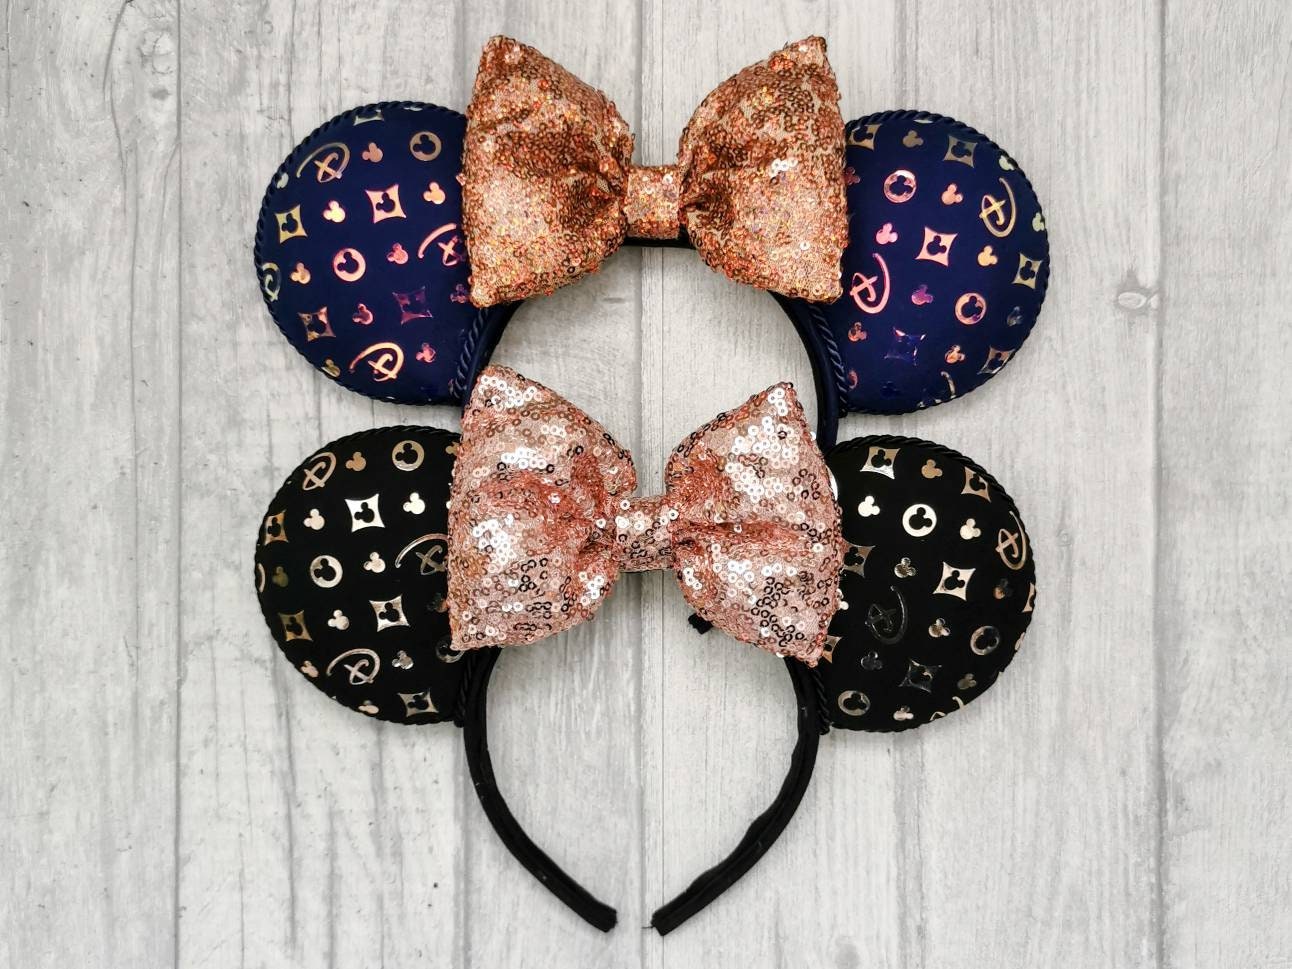 louis vuitton mickey mouse collection